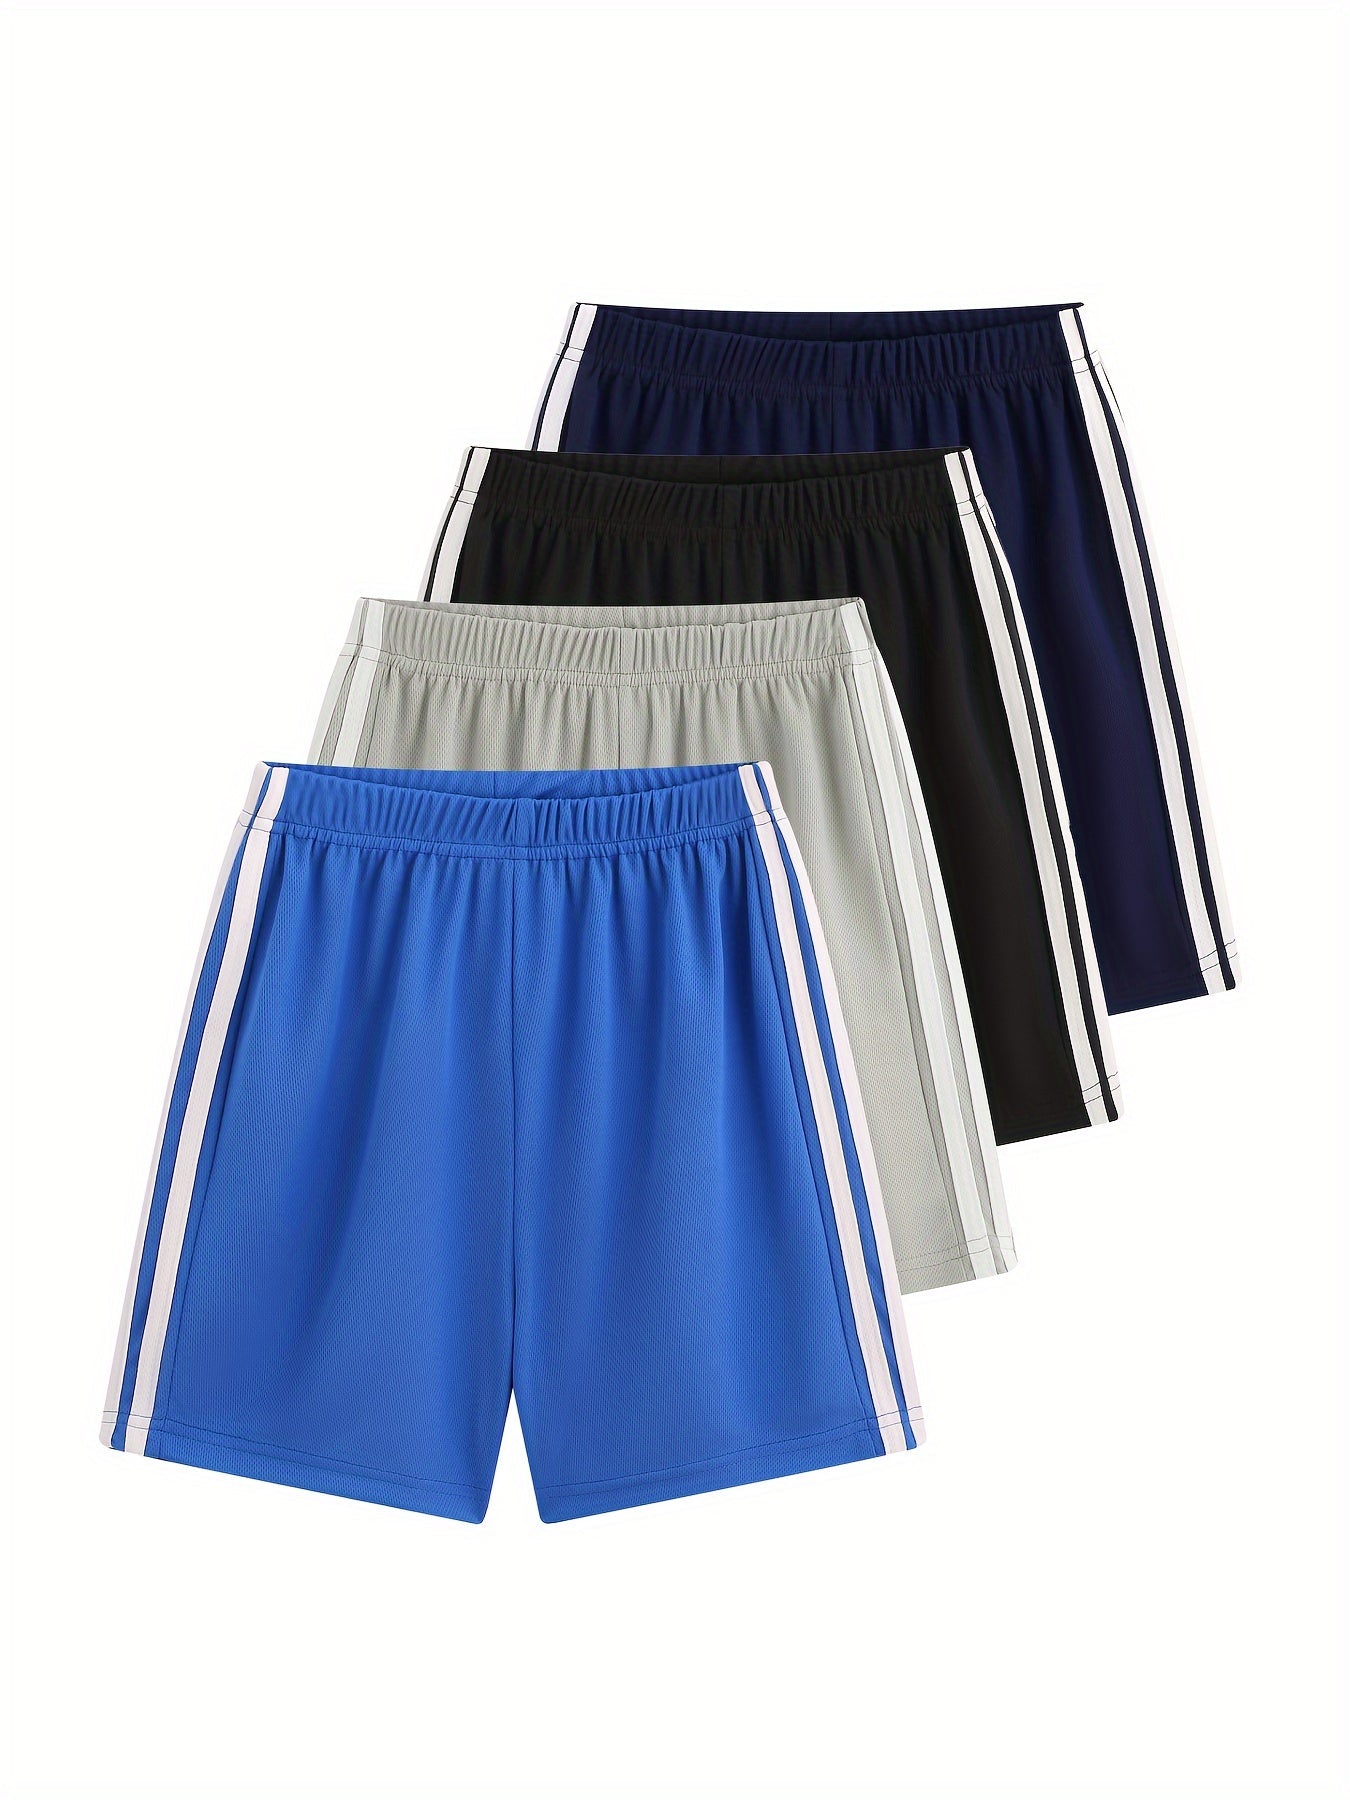 4Pcs Pack - Boys Super - Soft Quick - Dry Sport Shorts - Elastic Adjustable Waist, Breathable Loose Fit for Summer Basketball Training & Outdoor Fun - 4 Stylish Designs - Ammpoure Wellbeing